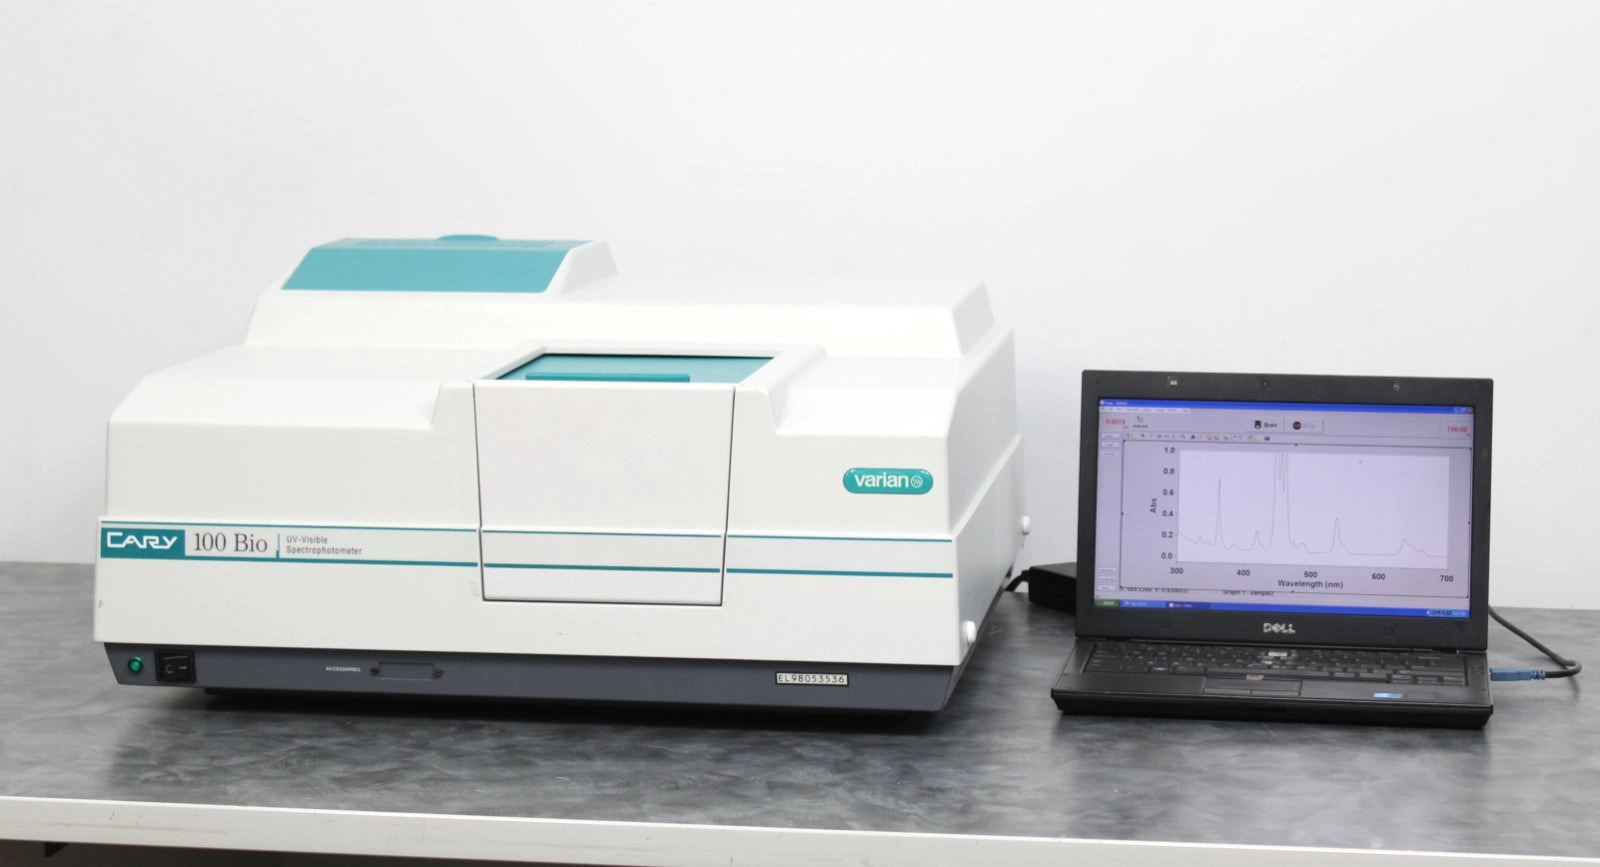 Varian Cary 100 Bio UV-Vis Spectrophotometer with Cuvette Holder and Laptop